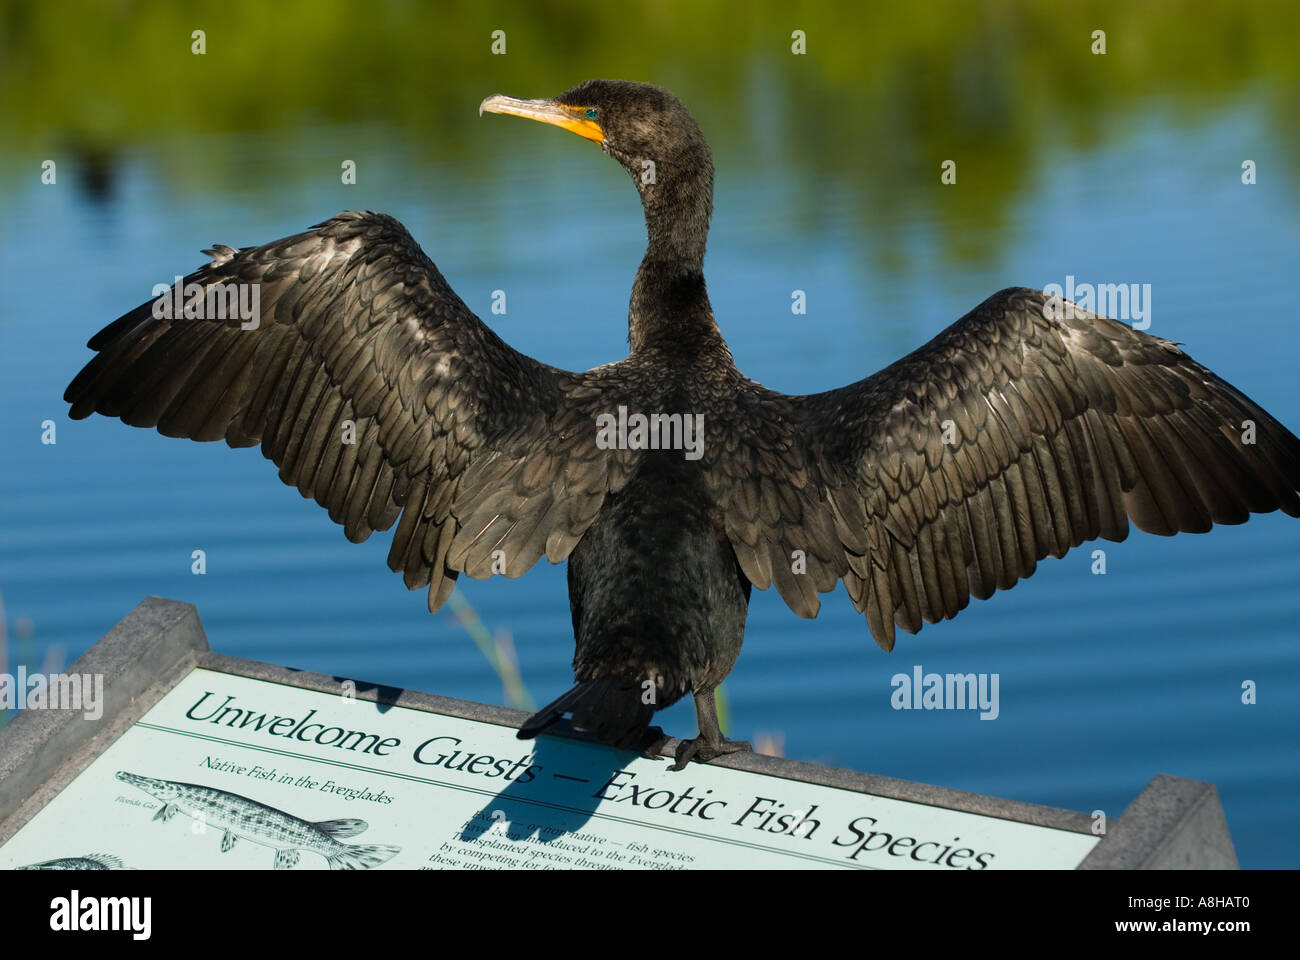 Double-crested Cormorant After Fishing in Greenery. Sea Bird with